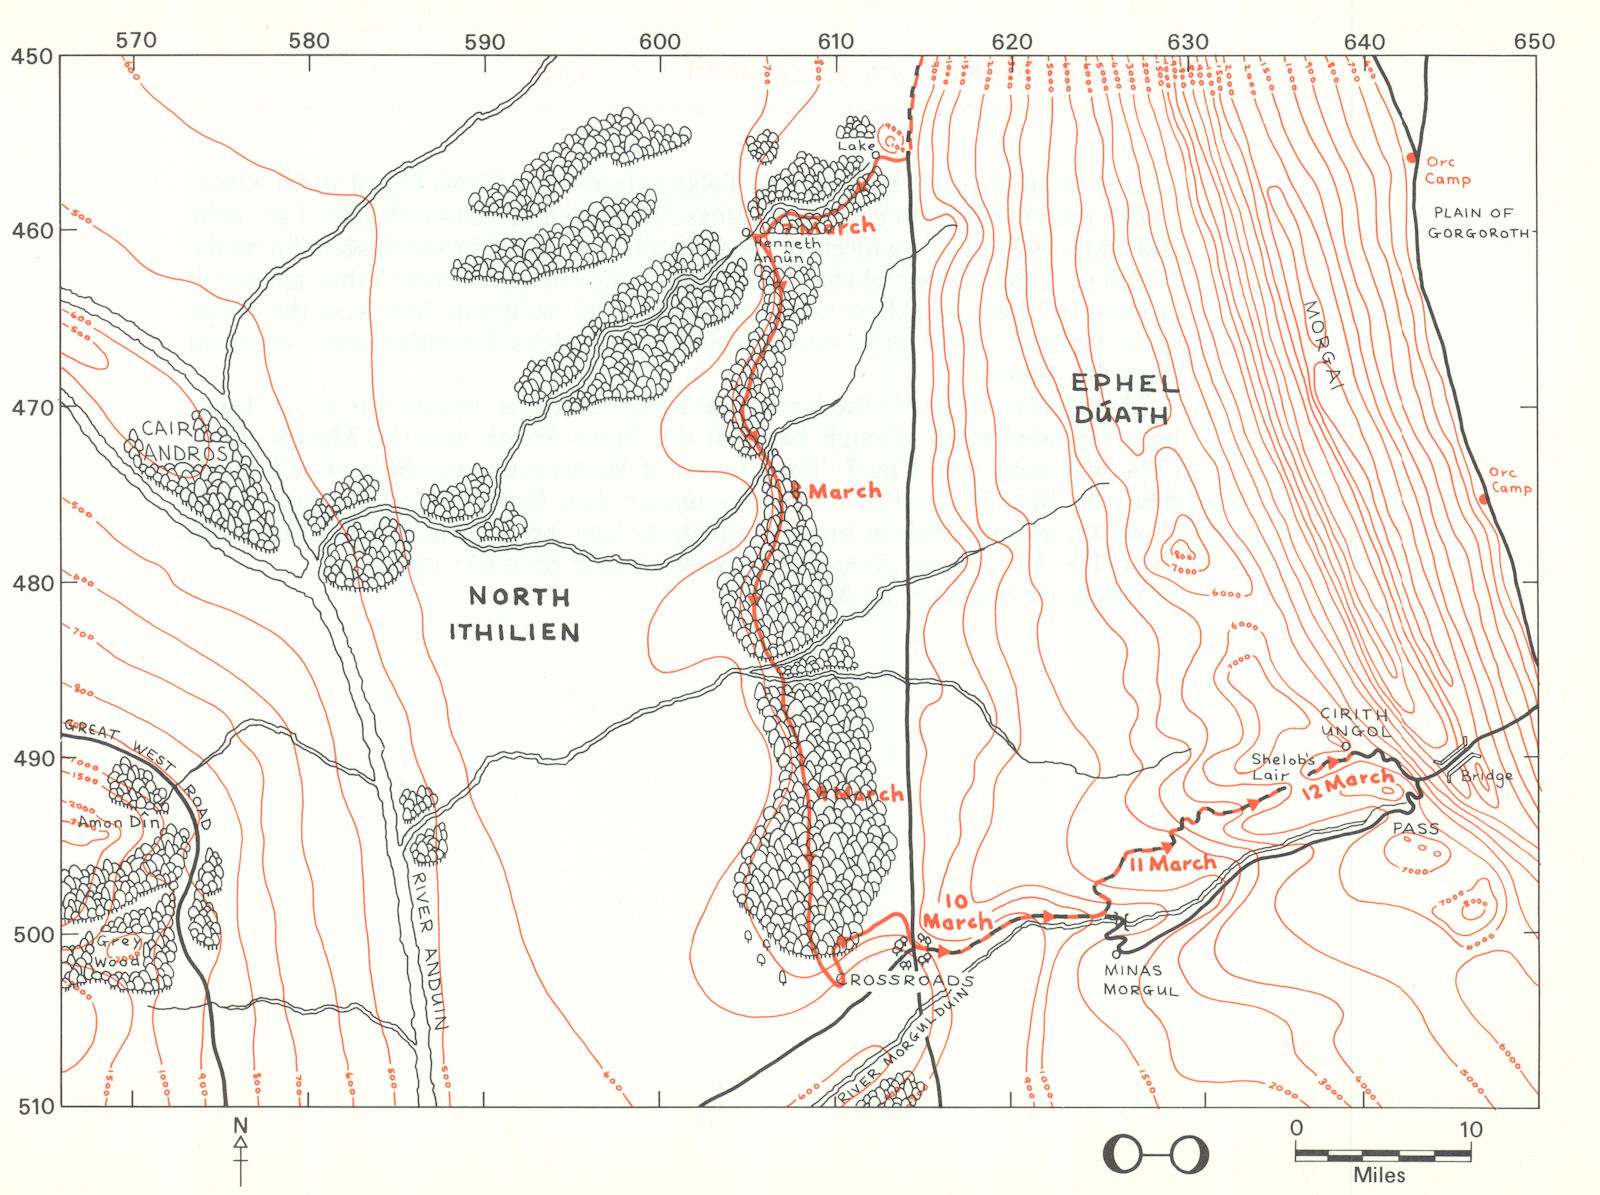 MIDDLE-EARTH Ithilien & Vale of Morgul. Frodo's route. TOLKIEN/STRACHEY 1981 map